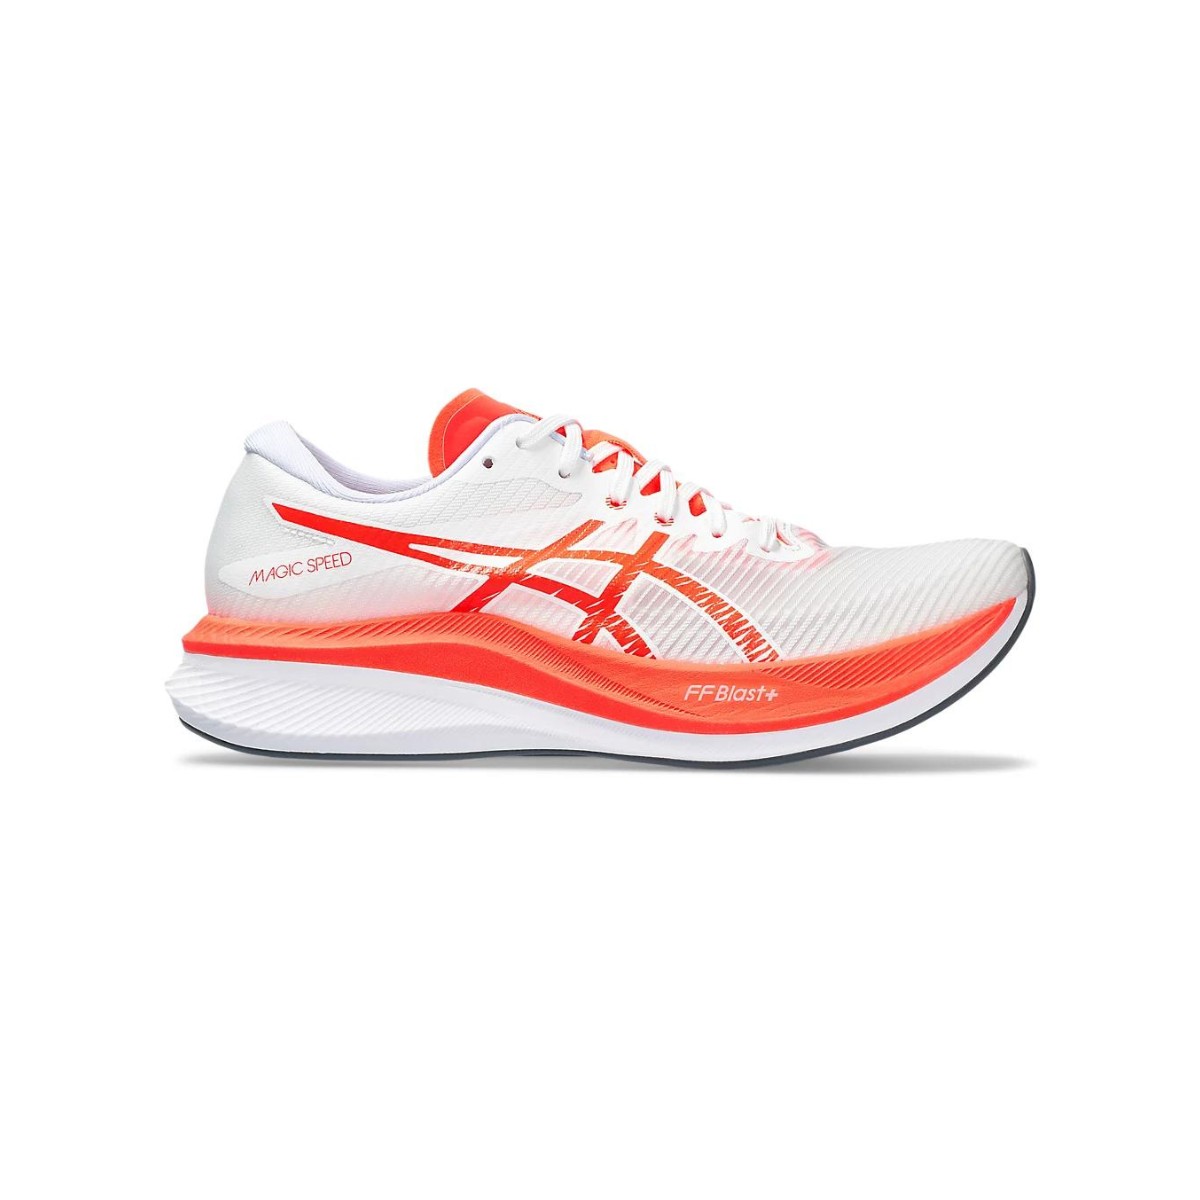 ASICS Magic Speed 3 - Speed and Comfort in Every Step